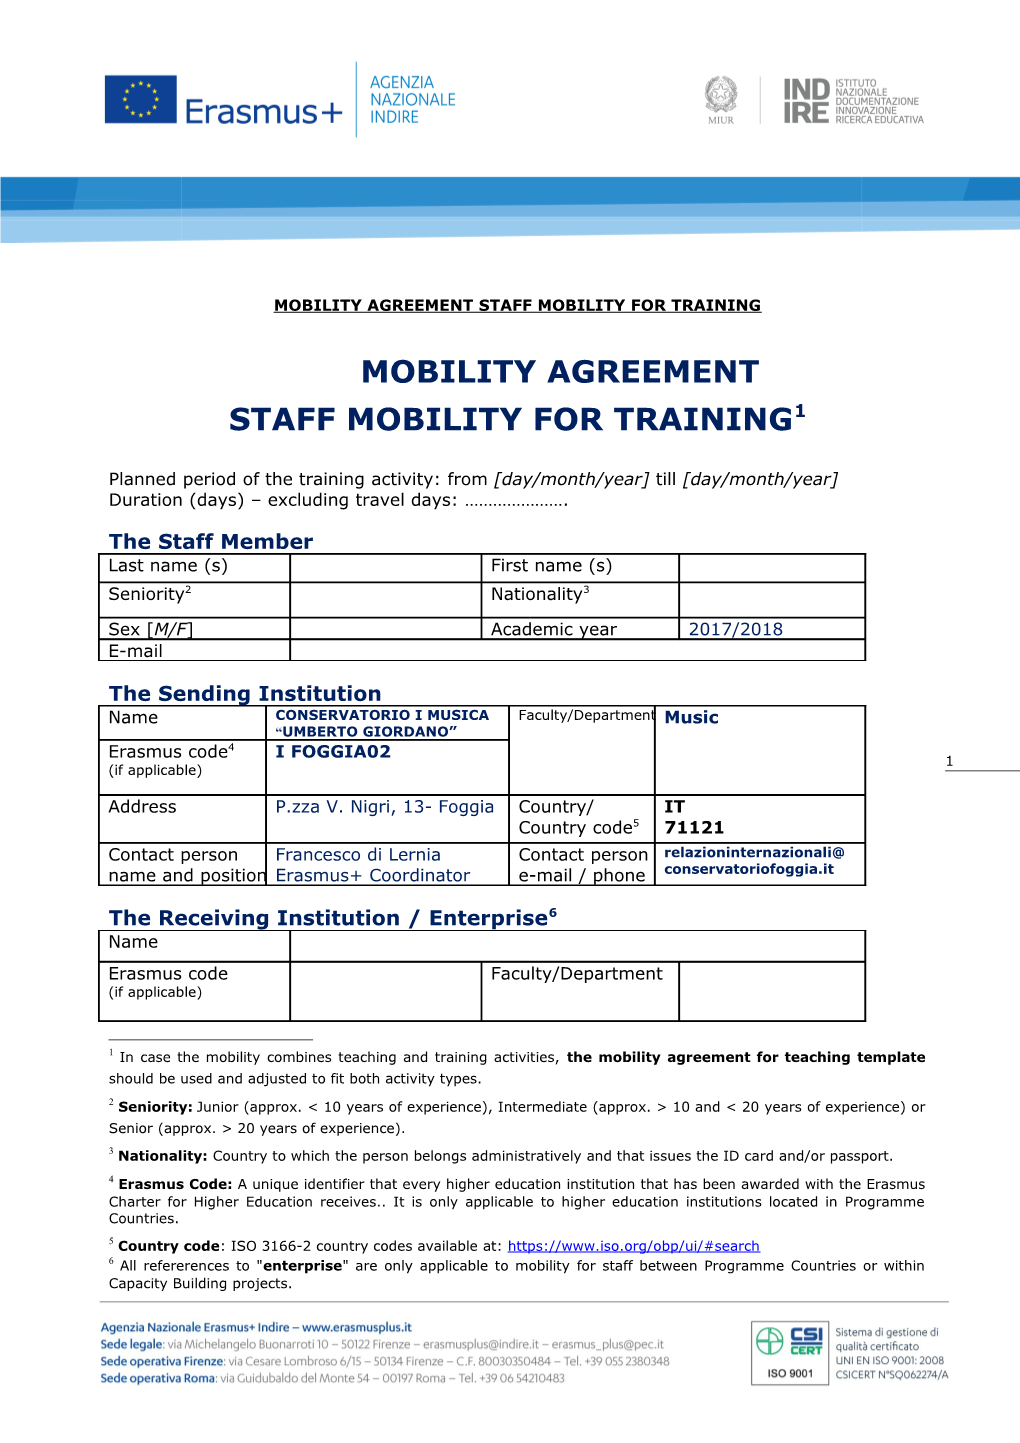 Mobility Agreement Staff Mobility for Training s1